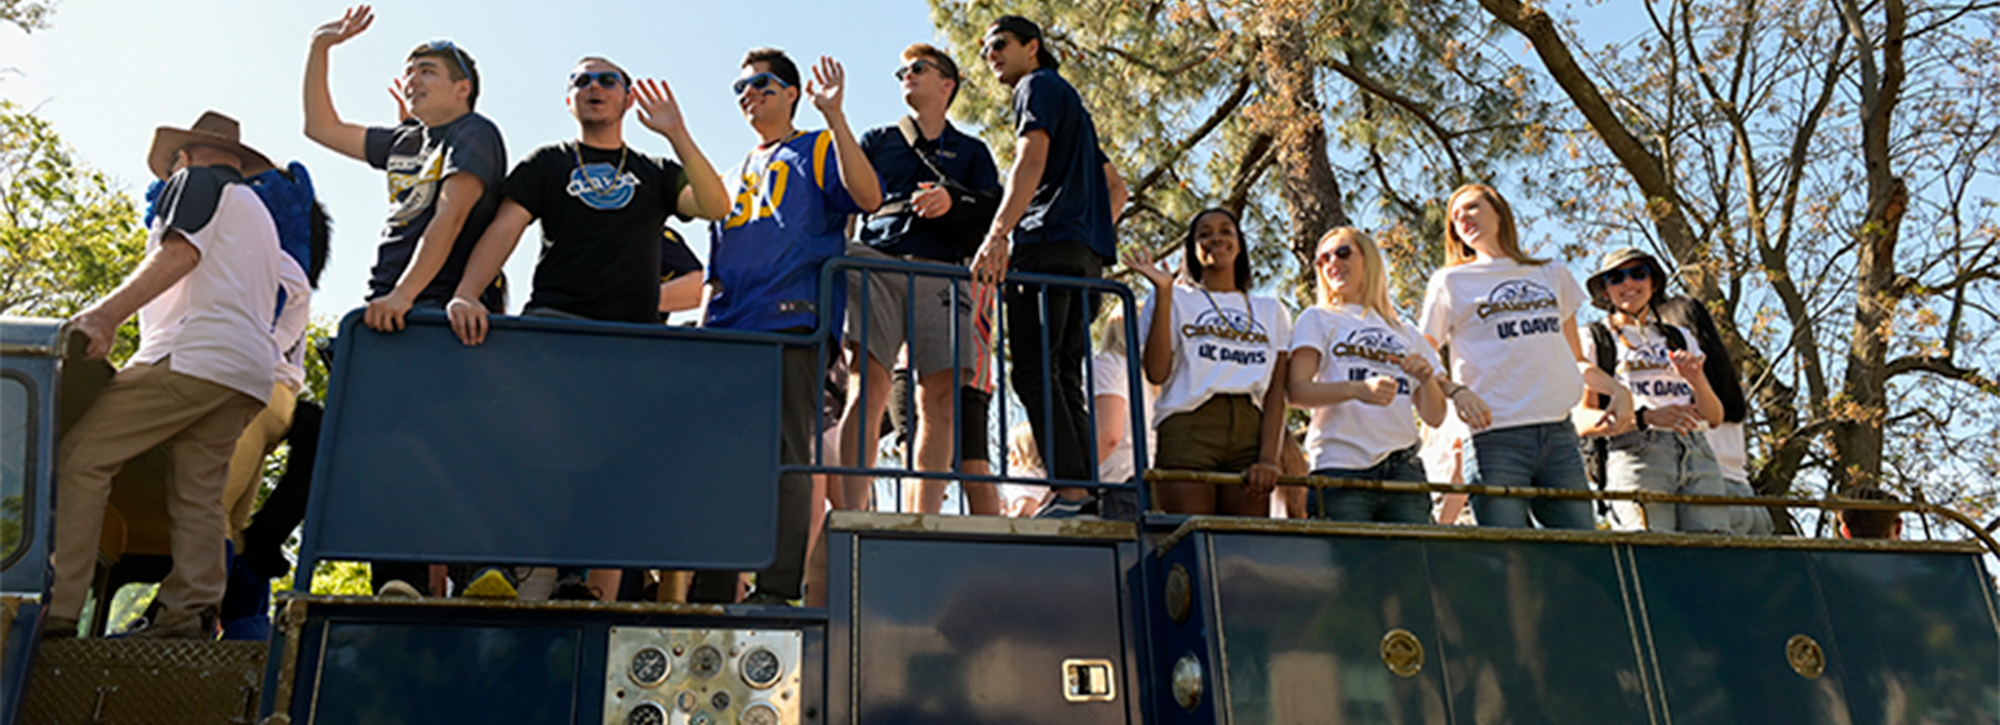 Students wave from atop a fire truck during Picnic Day parade